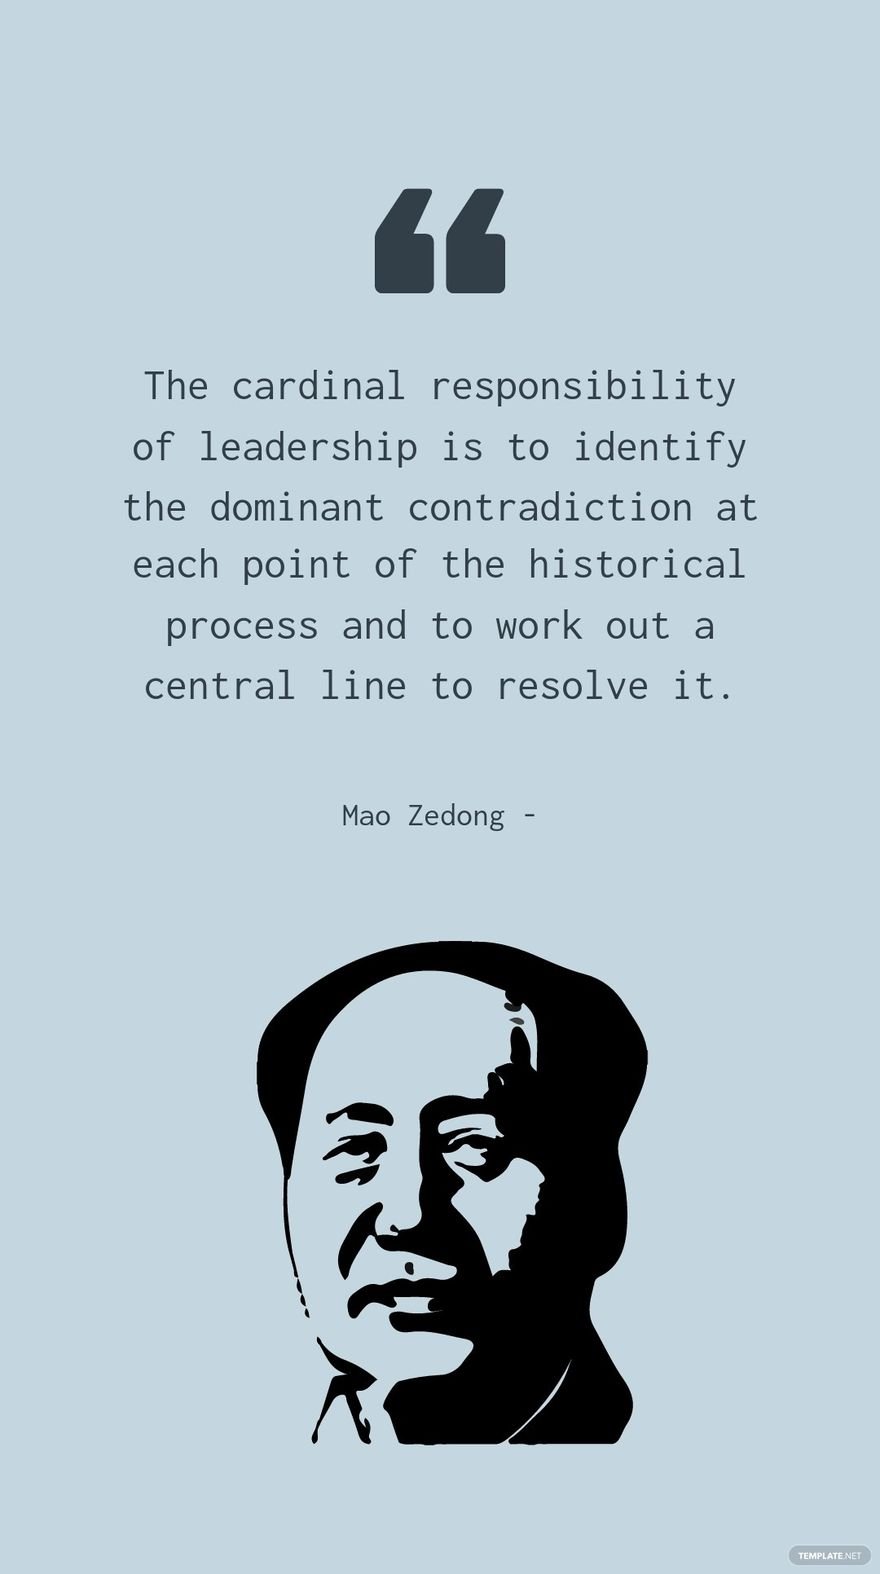 Mao Zedong - The cardinal responsibility of leadership is to identify the dominant contradiction at each point of the historical process and to work out a central line to resolve it.